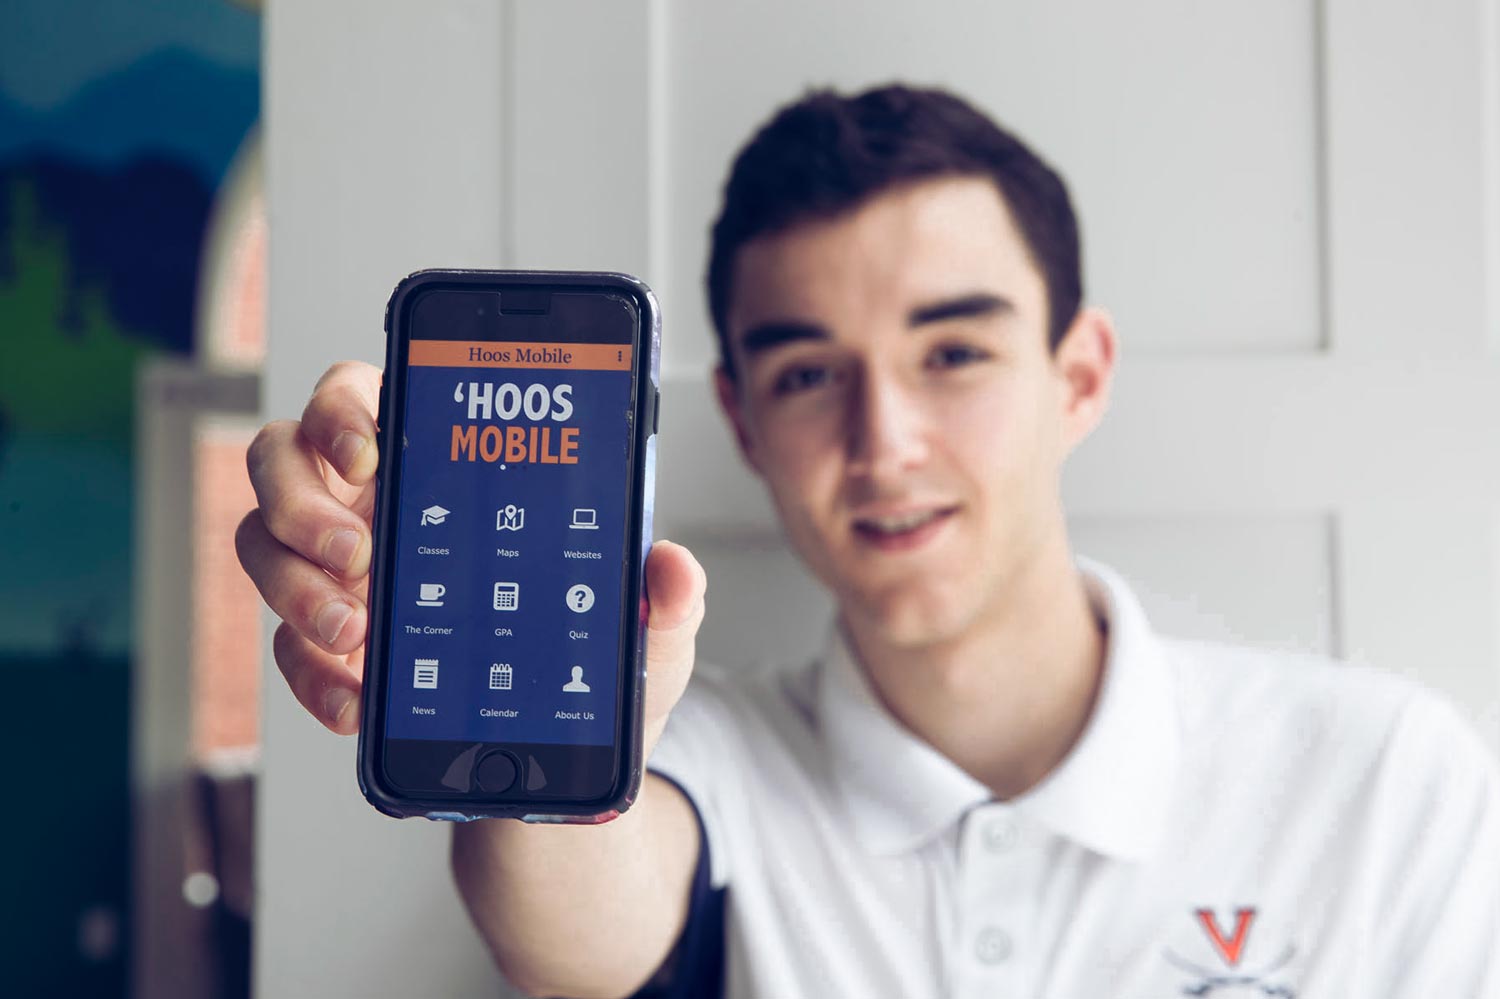 Matthew Wajsgras holds up his phone with the 'Hoos Mobile app opened